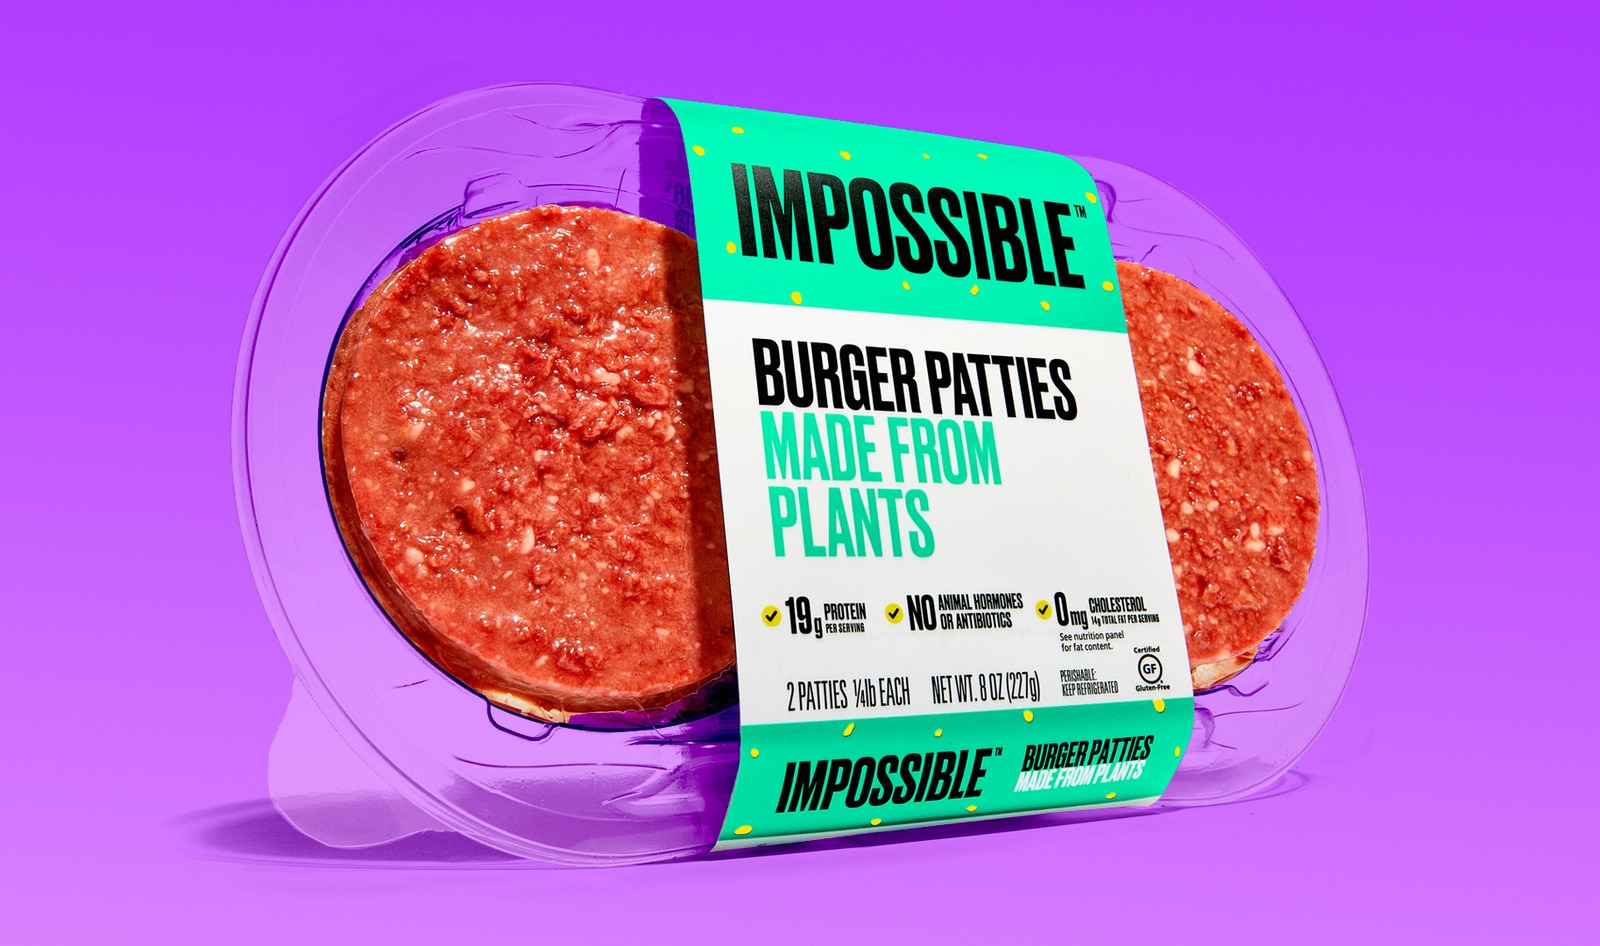 92 Percent of Impossible Burger Sales Directly Displace Animal Meat